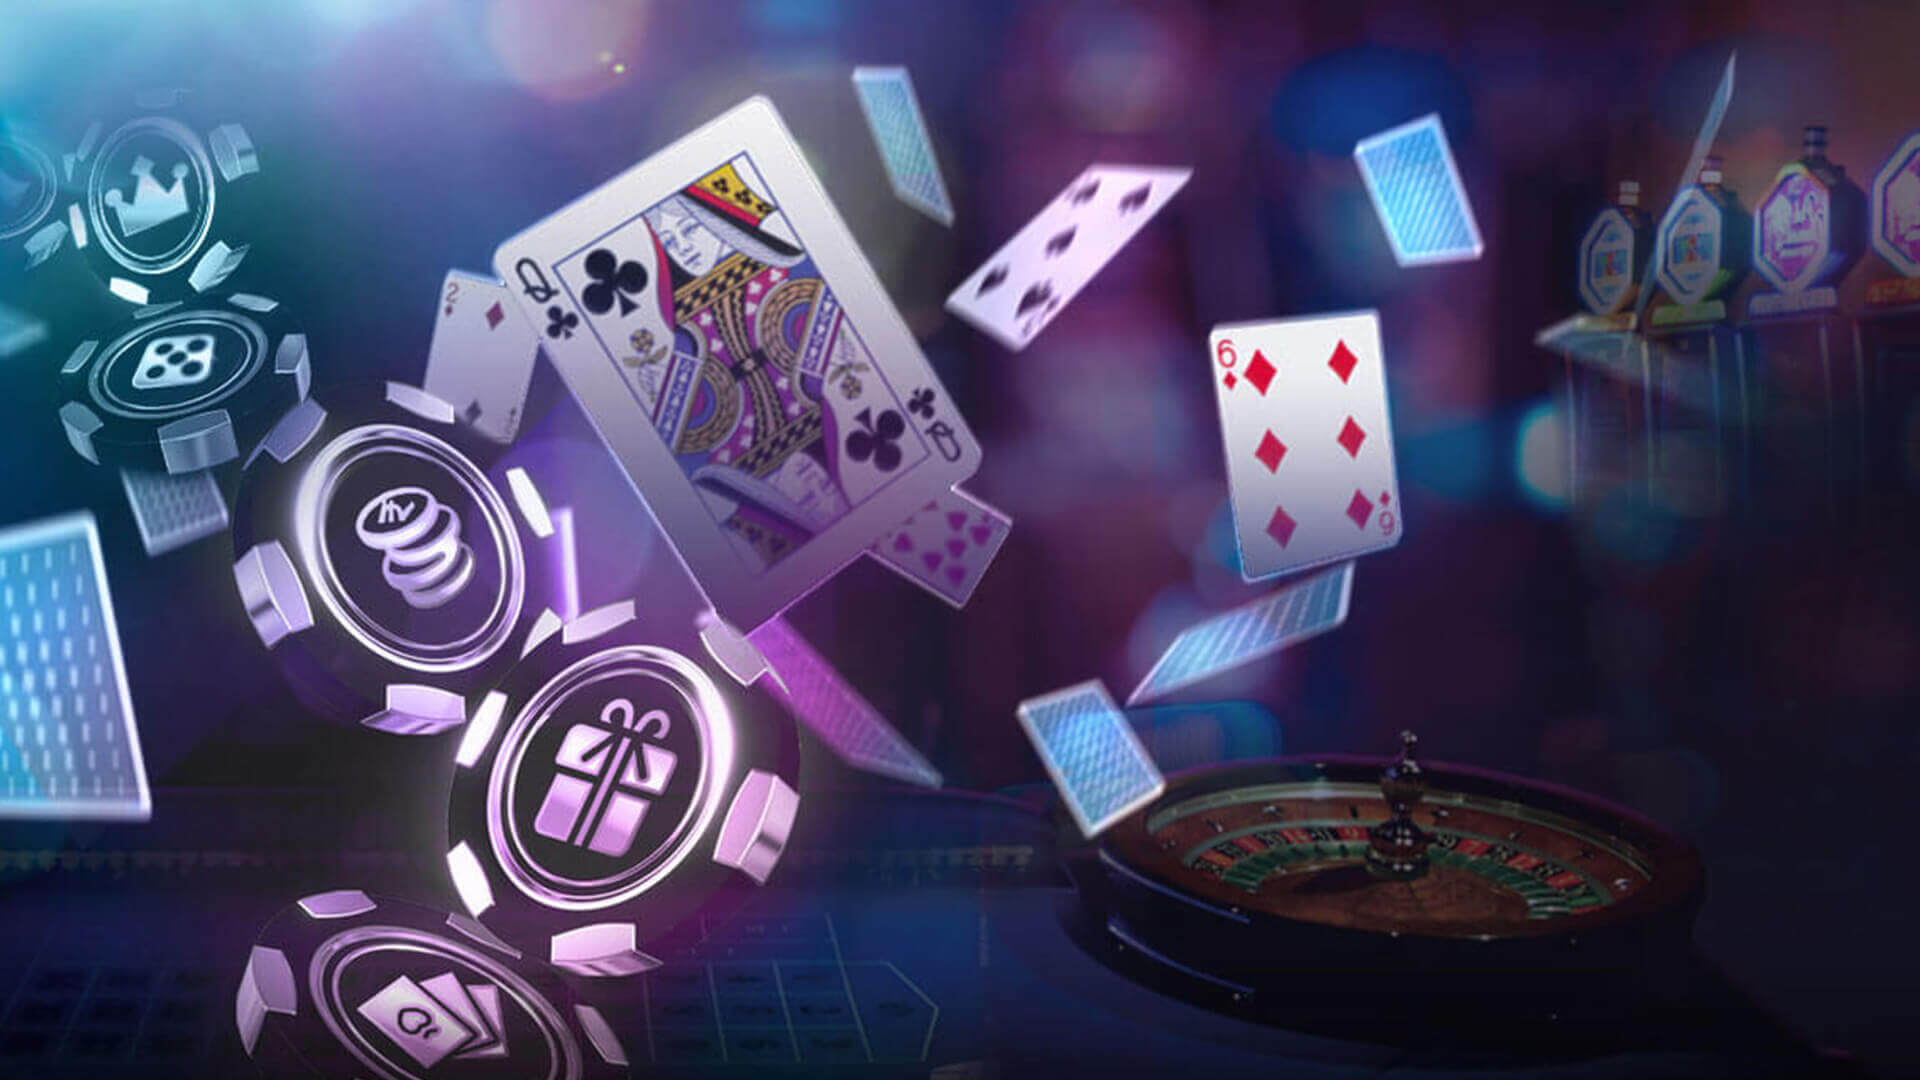 What Make SLOT GAMBLING SITE Don't Want You To Know